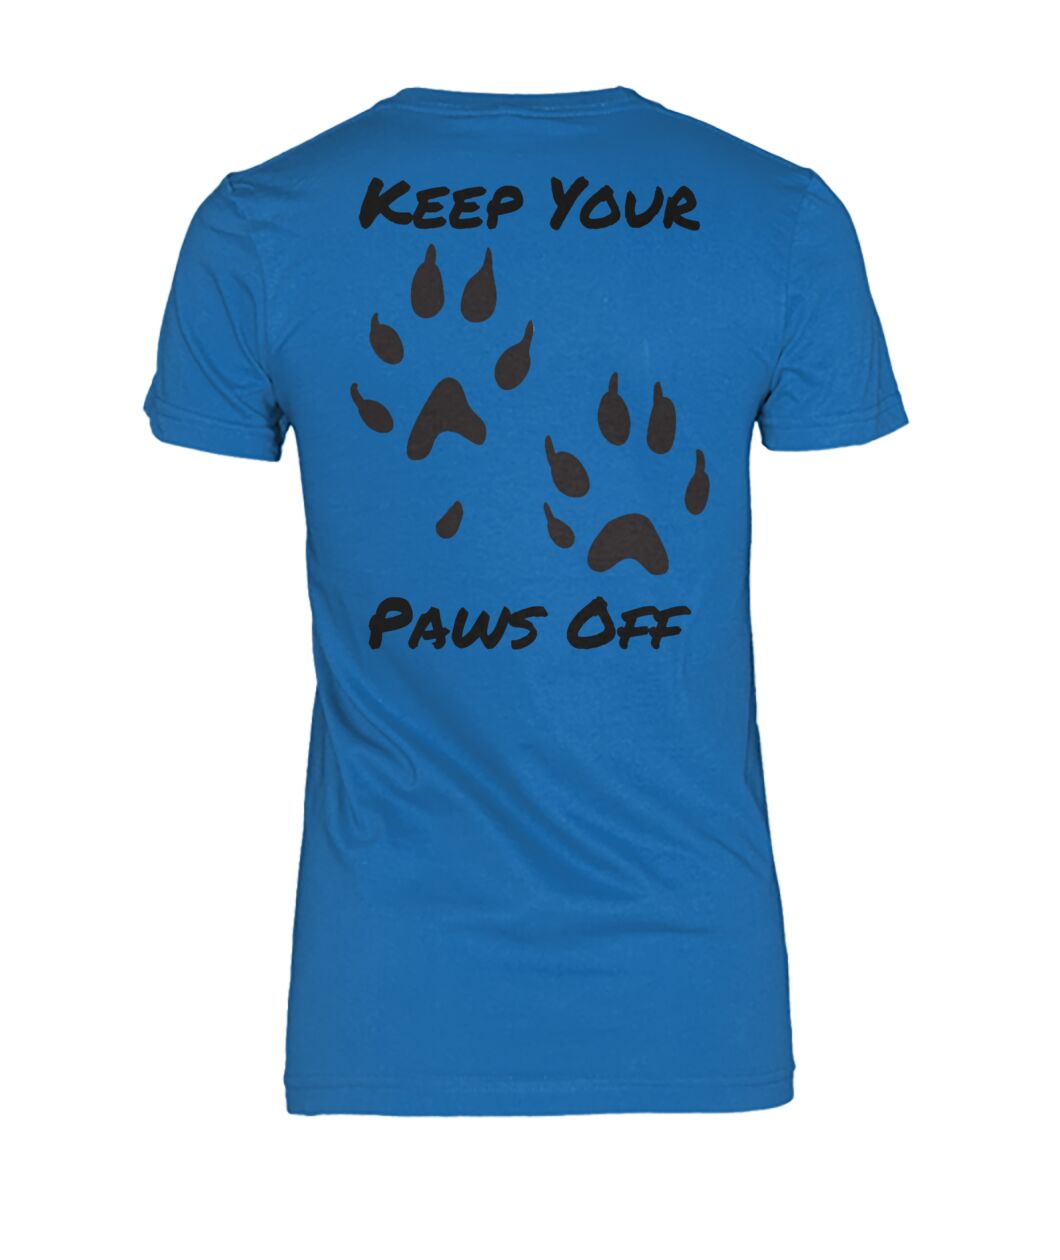 Paws Off